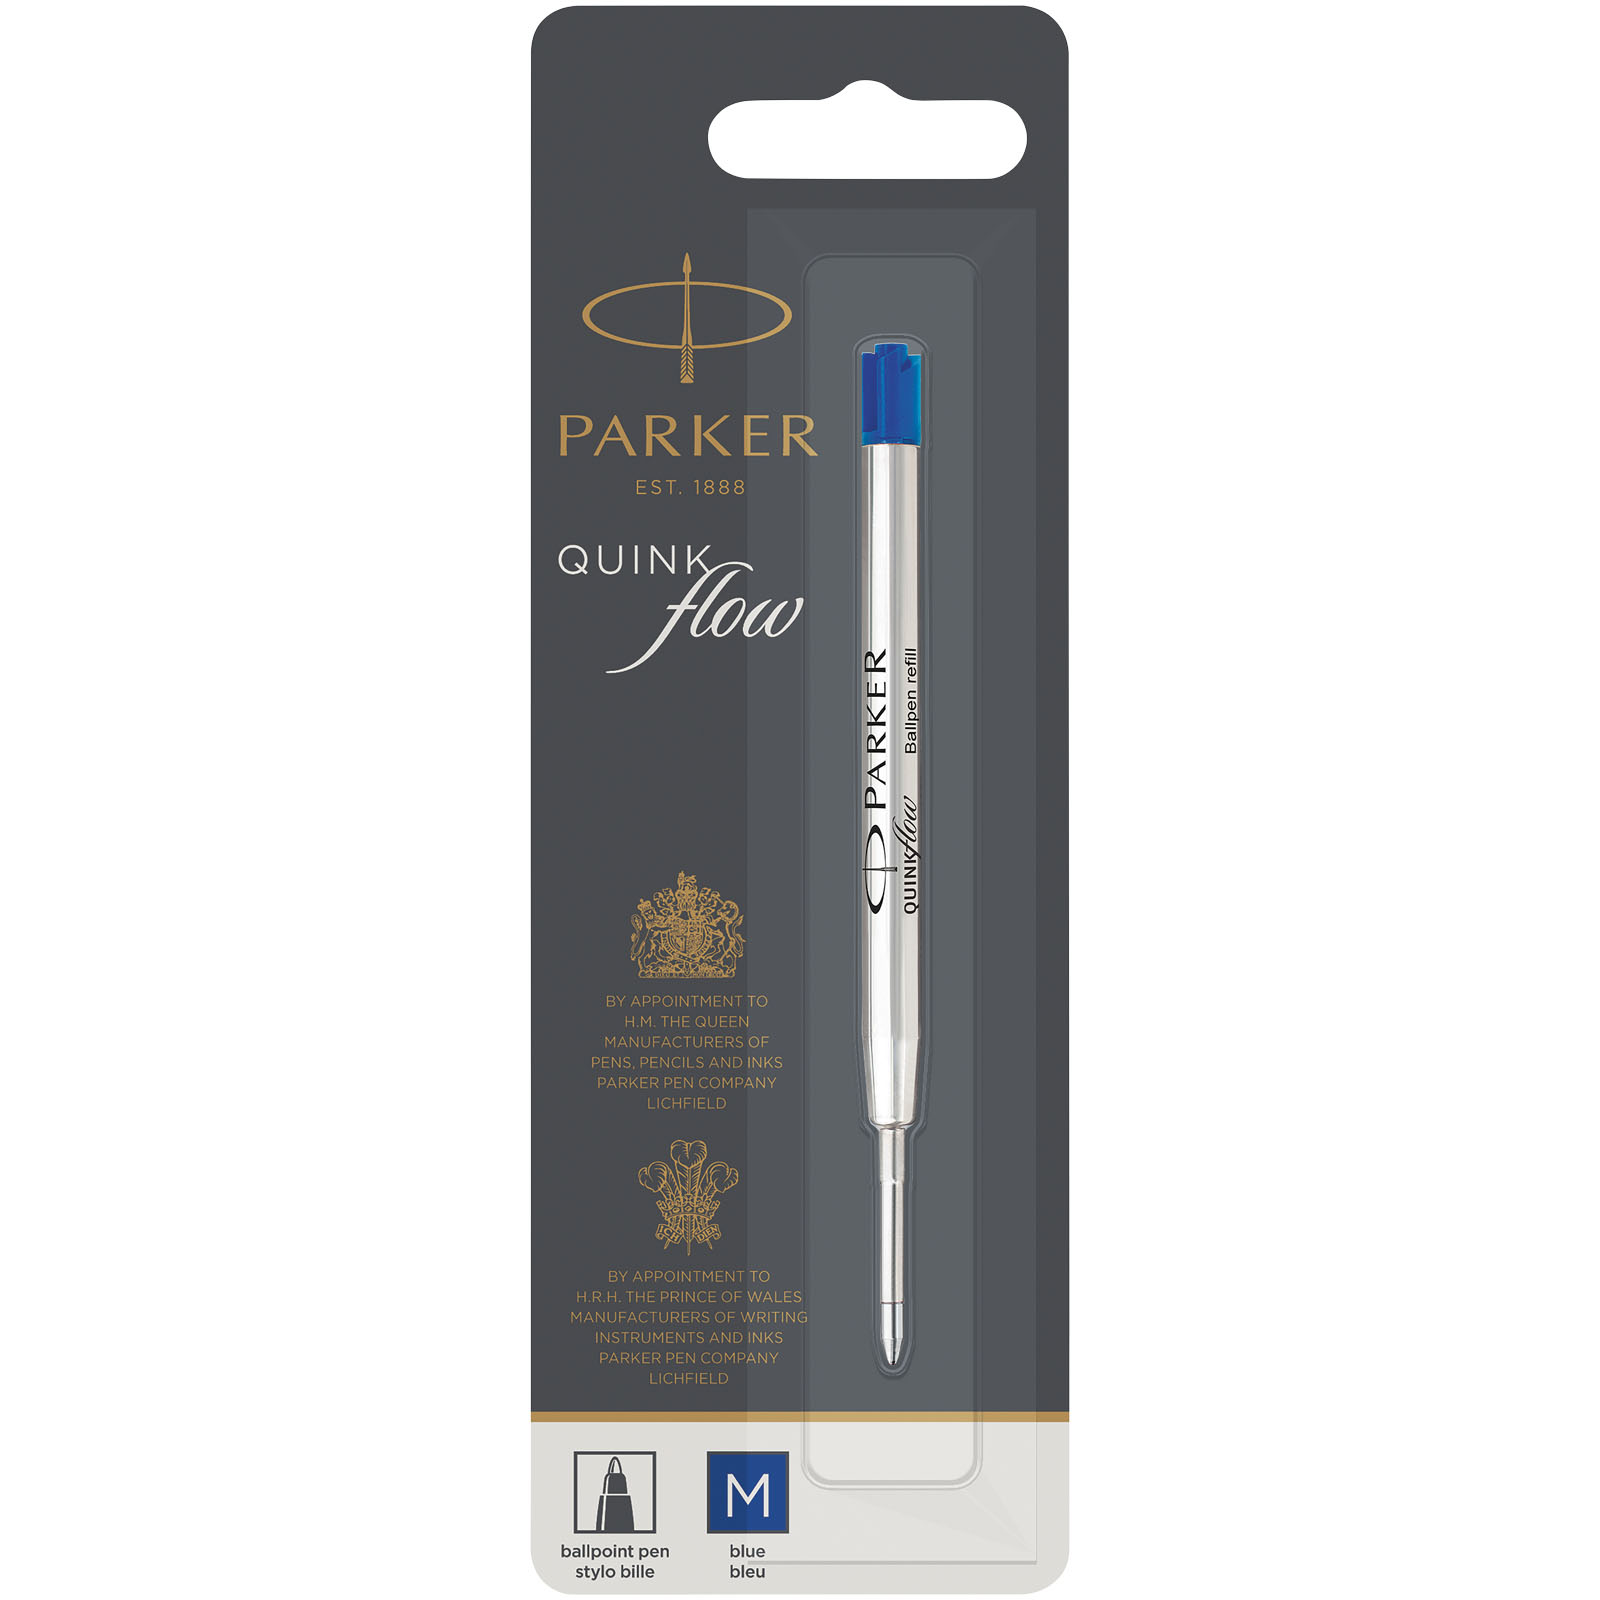 Advertising Other Pens & Writing Accessories - Parker Quinkflow ballpoint pen refill